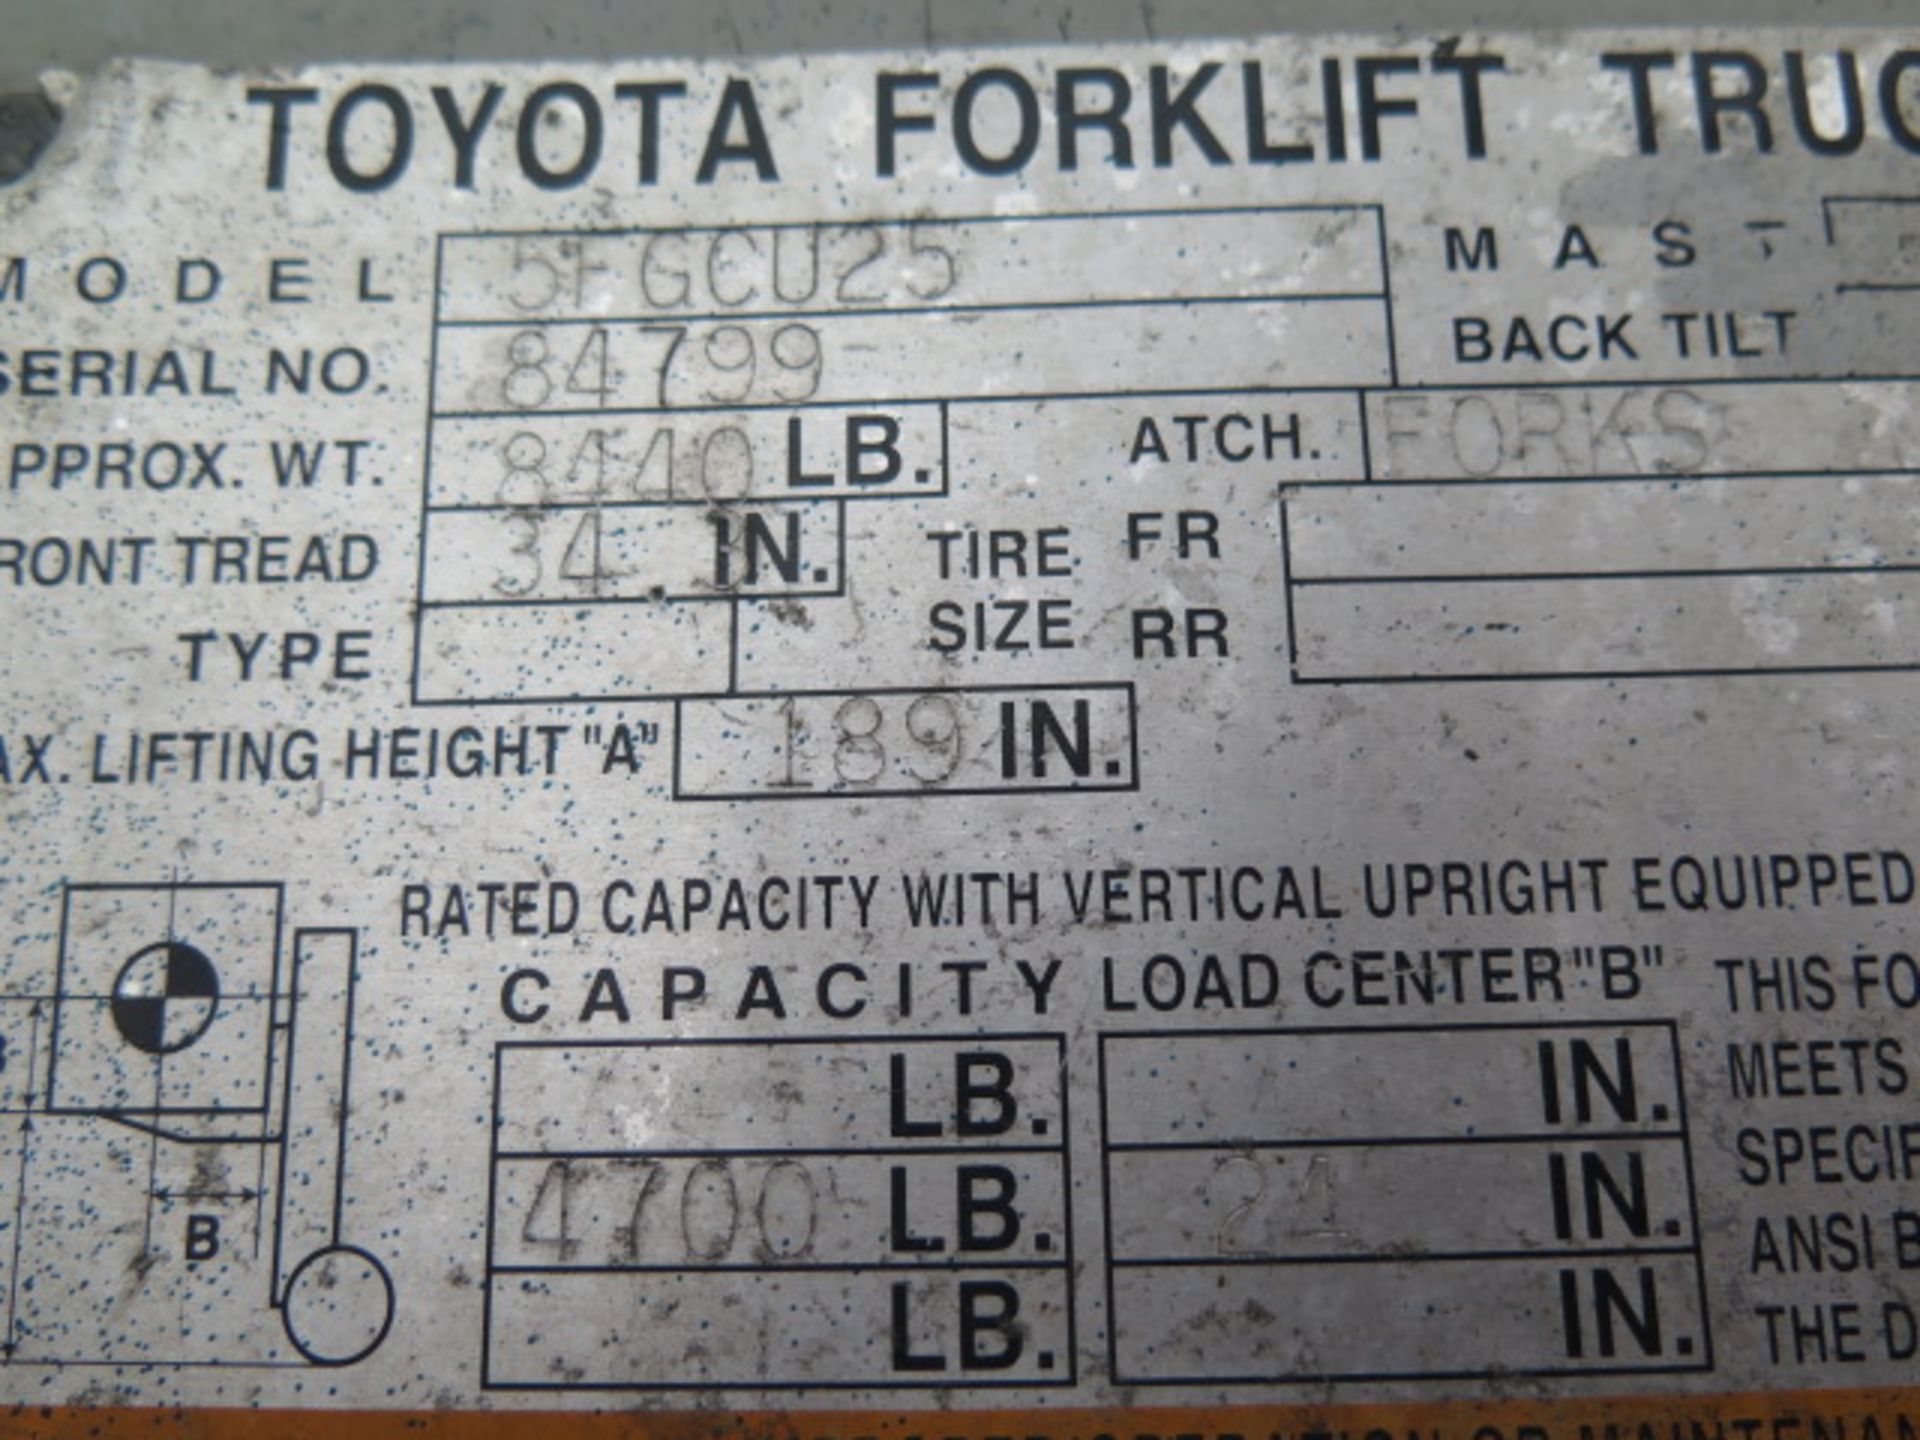 Toyota 5FGCU25 5000 Lb Cap LPG Forklift s/n 84799 w/ 3-Stage Mast, 189" Lift Height, Cushion - Image 10 of 11